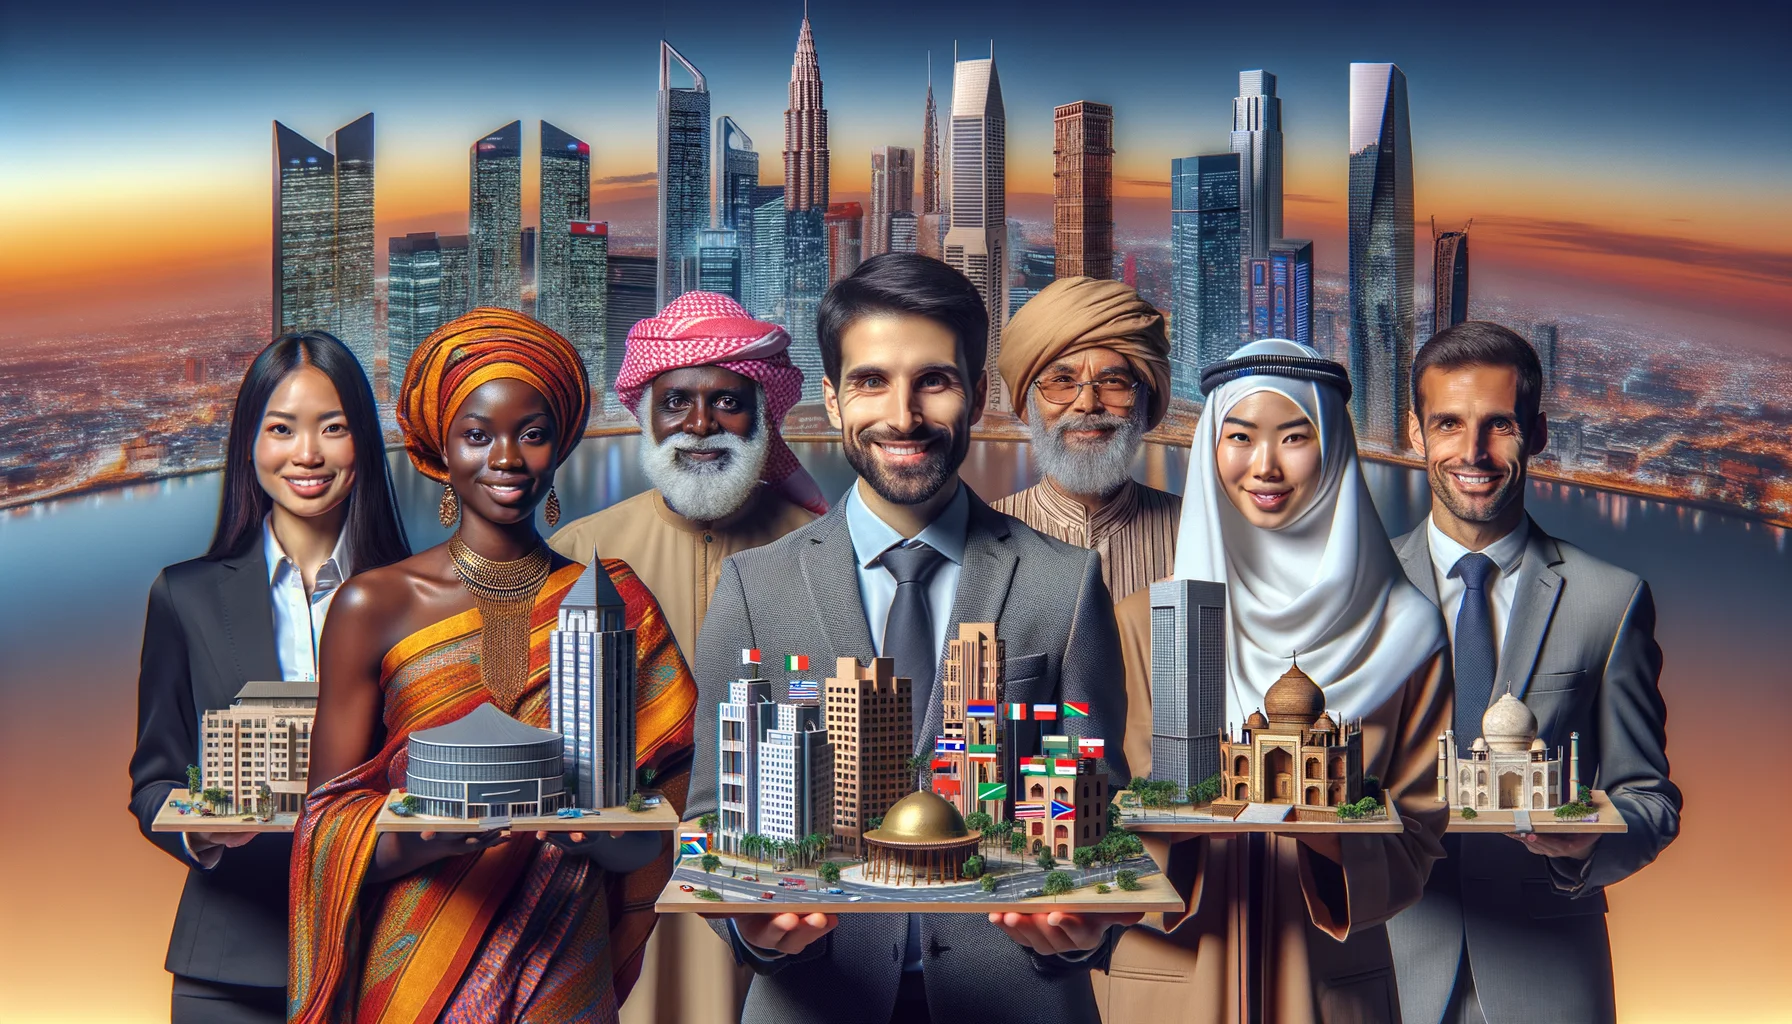 Generate a humorous, realistic image of international sponsorship in the realm of real estate. This scene depicts representatives from diverse global cultures, each holding a scale model of iconic architectural buildings they sponsor. In the mix, there is a confident African female real estate investor presenting a miniature of a skyscraper, a cheerful Middle-Eastern male developer showcasing a model of a luxurious villa, an Asian female tycoon displaying a model of an ancient temple, and a jovial Caucasian male sponsor with a model of a modern condominium. The backdrop visualizes a vibrant international city skyline.